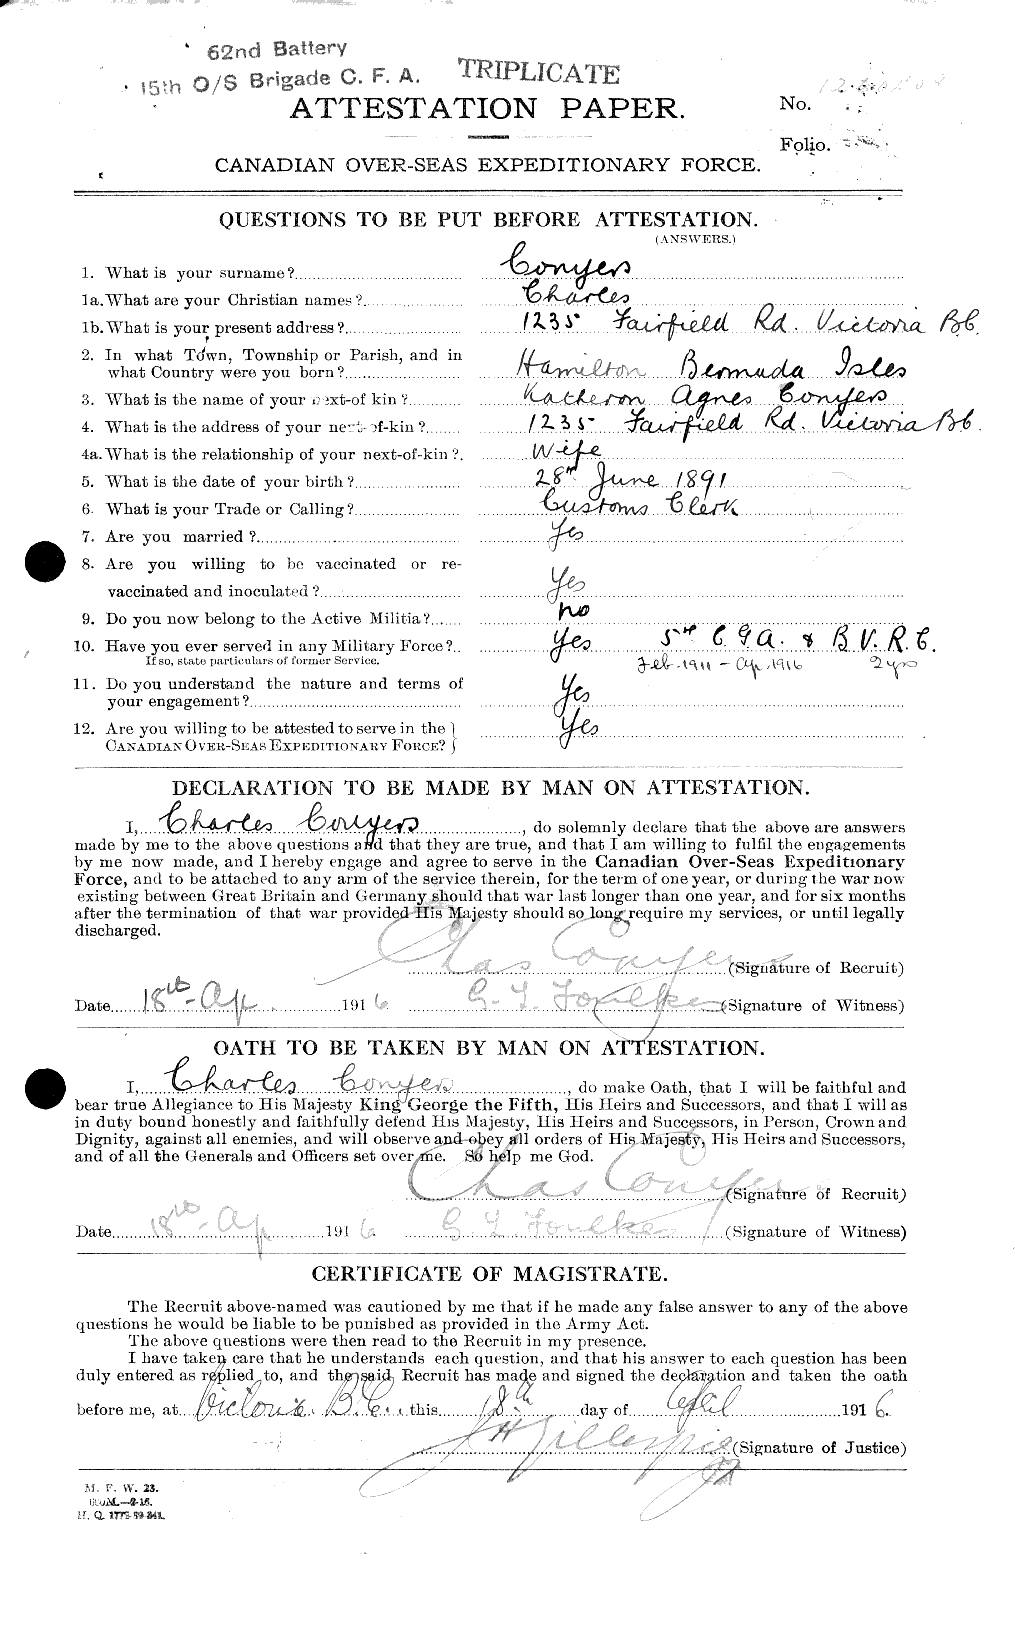 Personnel Records of the First World War - CEF 038673a